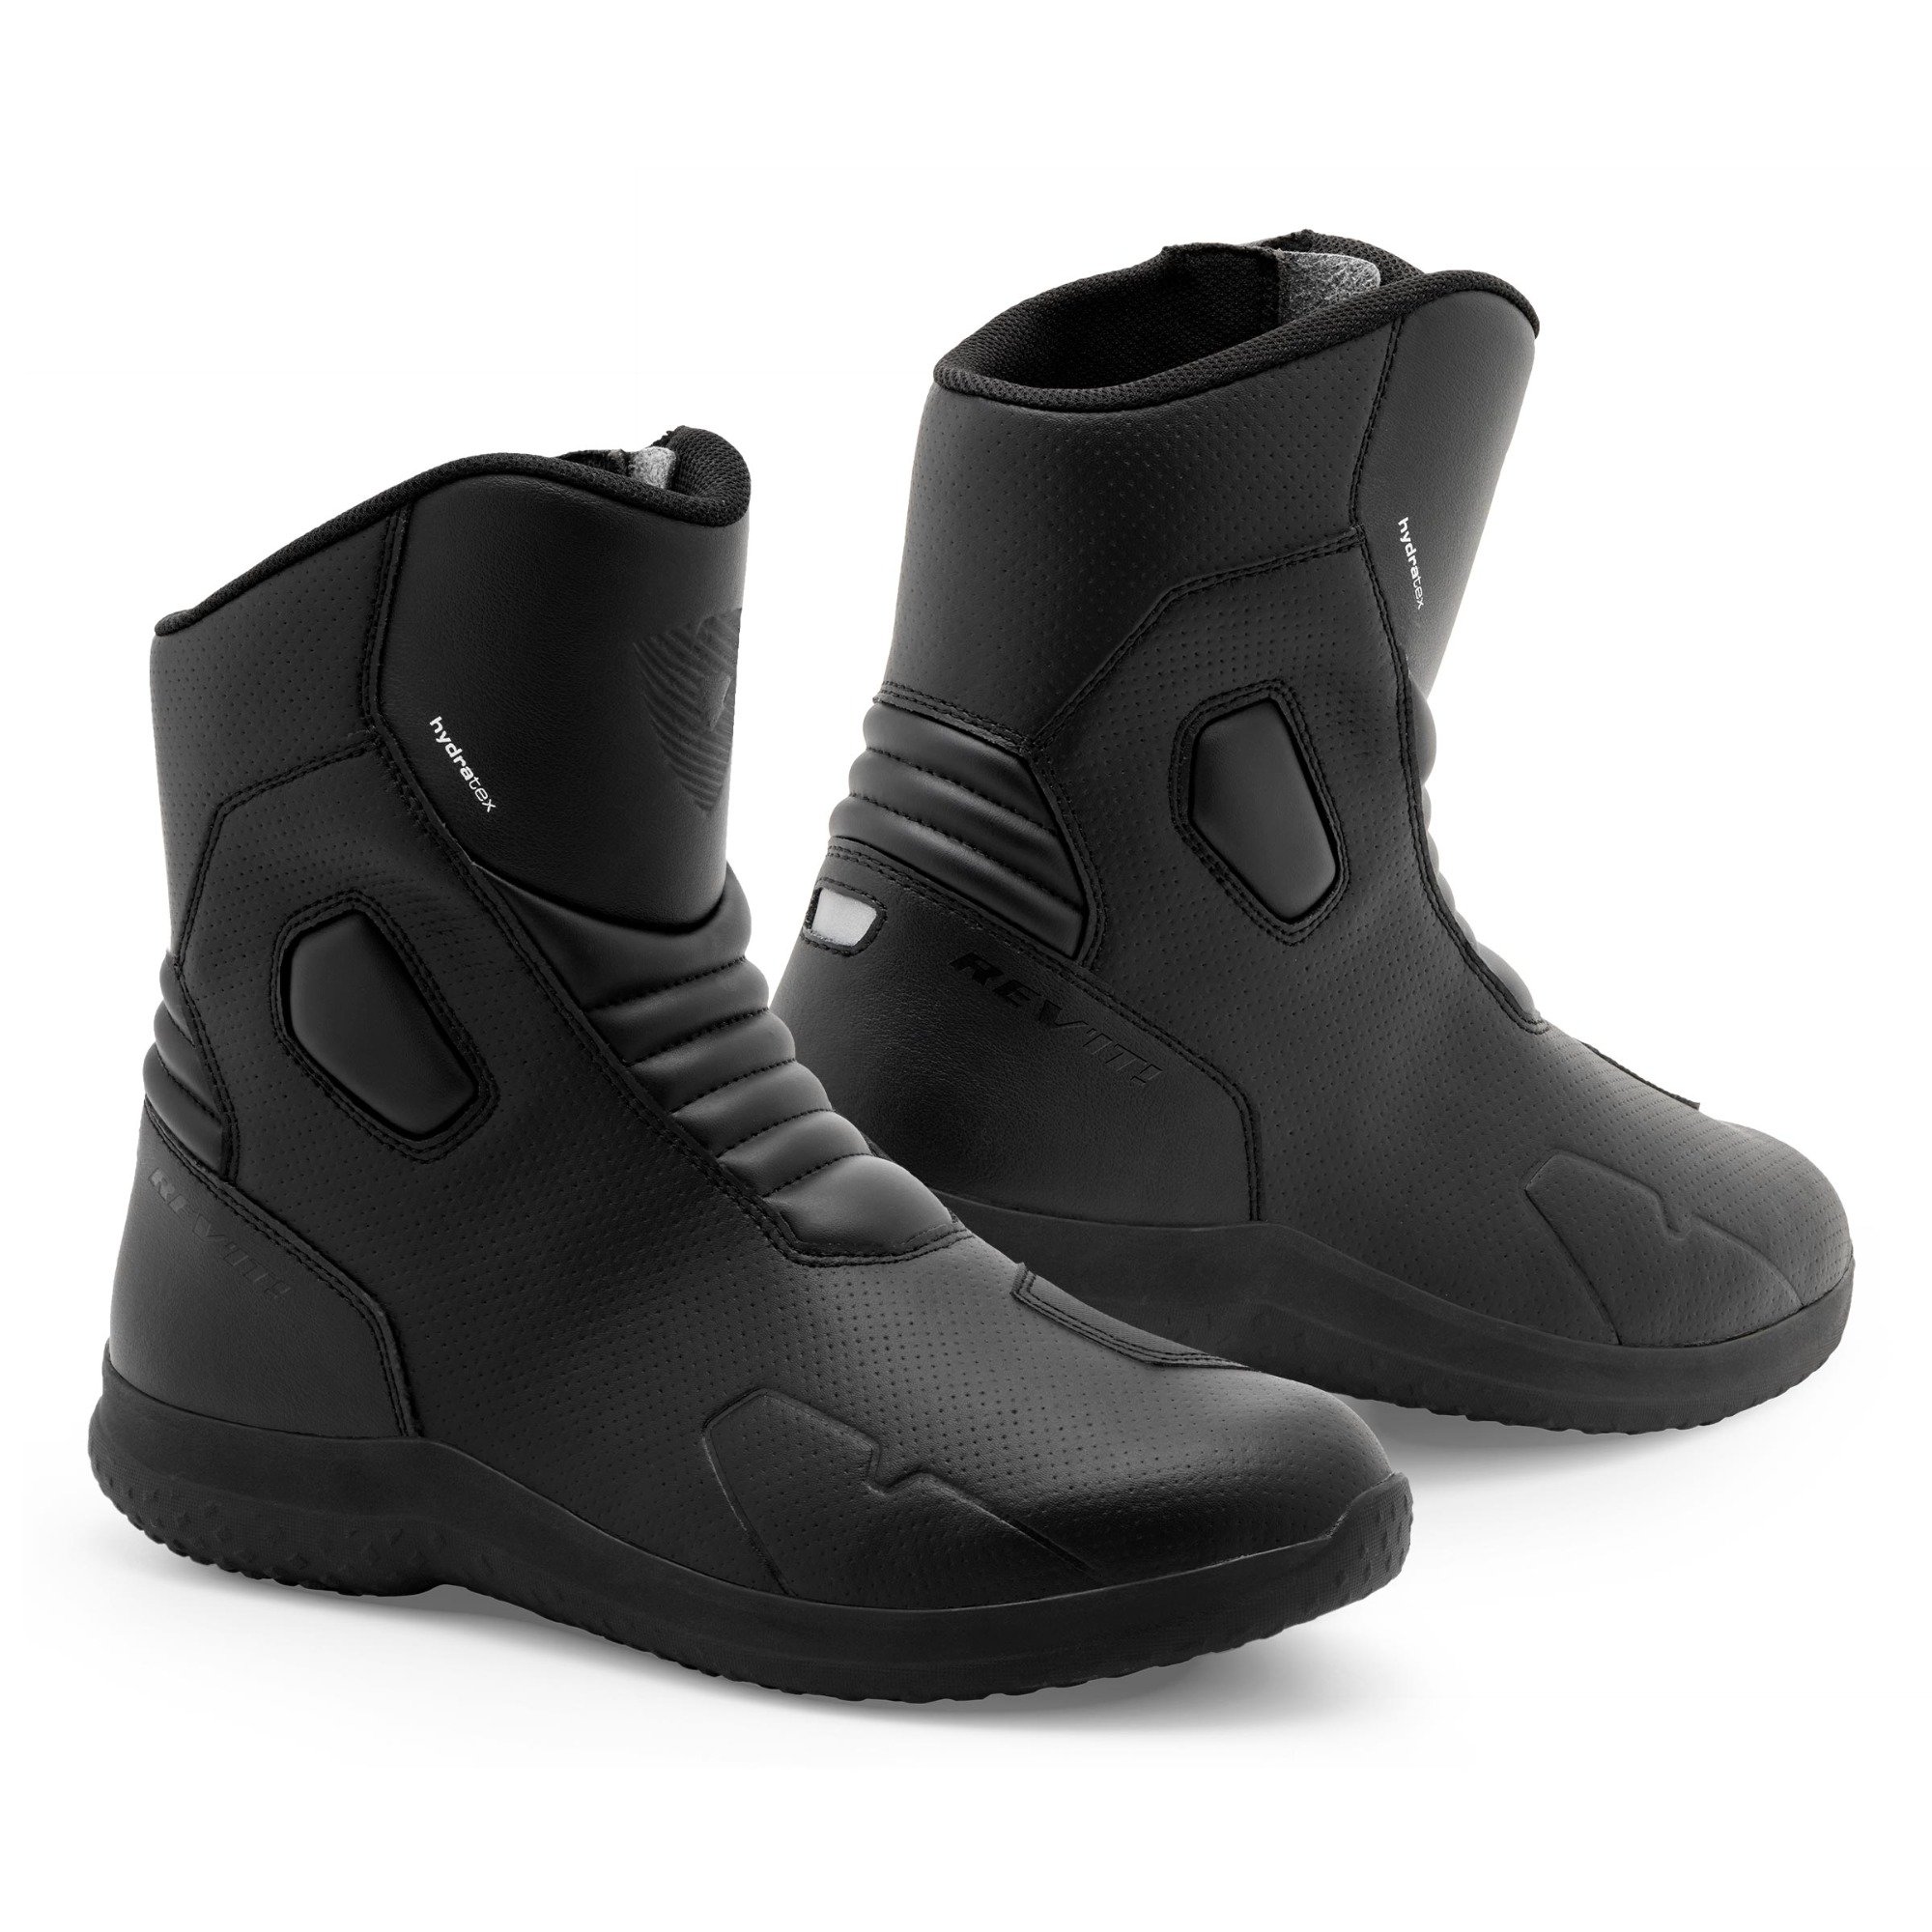 Image of REV'IT! Boots Fuse H2O Black Size 41 ID 8700001330381